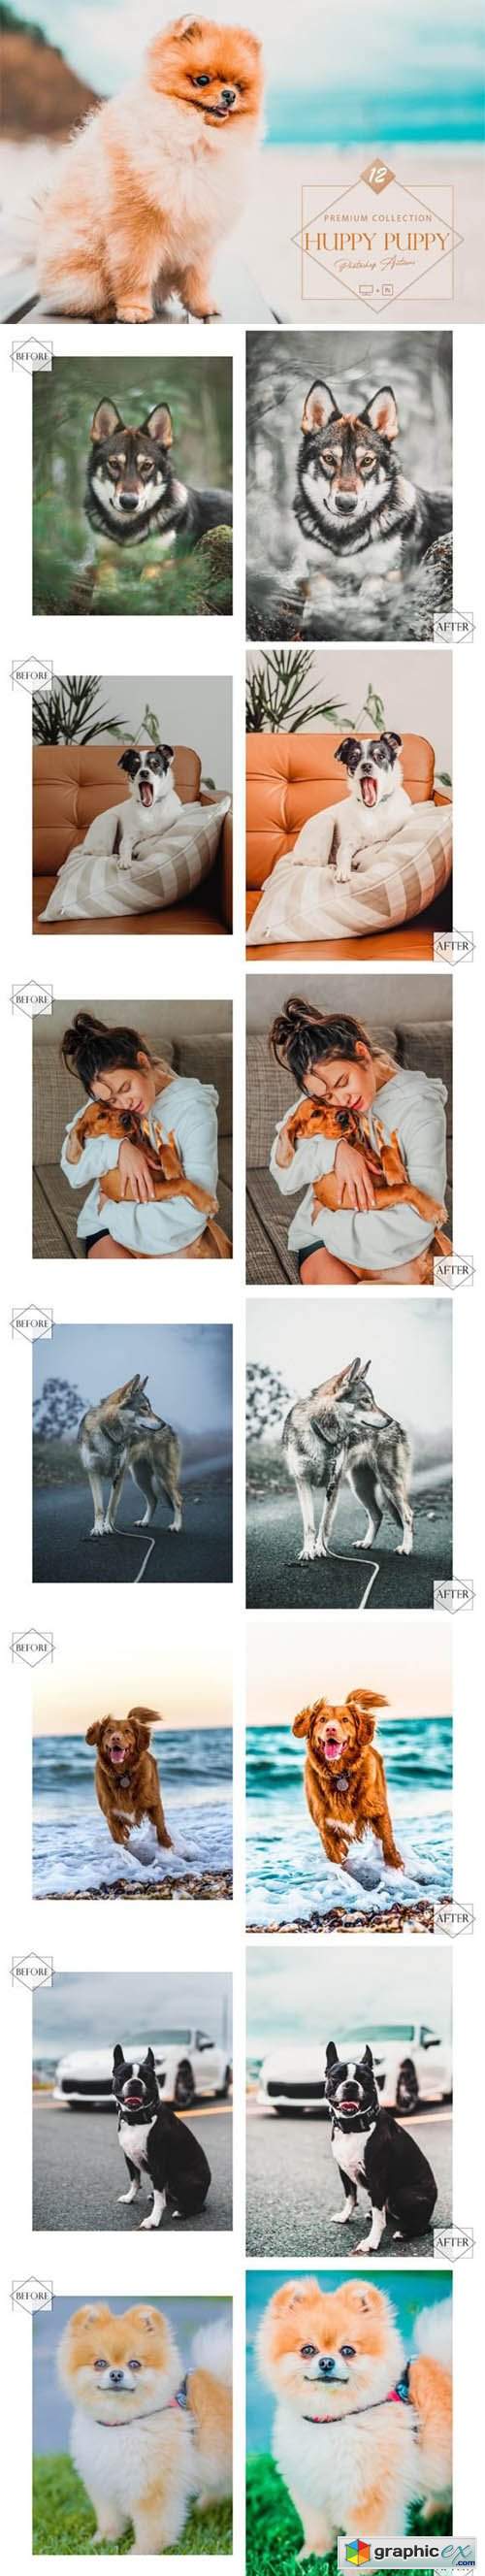  12 Huppy Puppy Photoshop Actions, Pet 